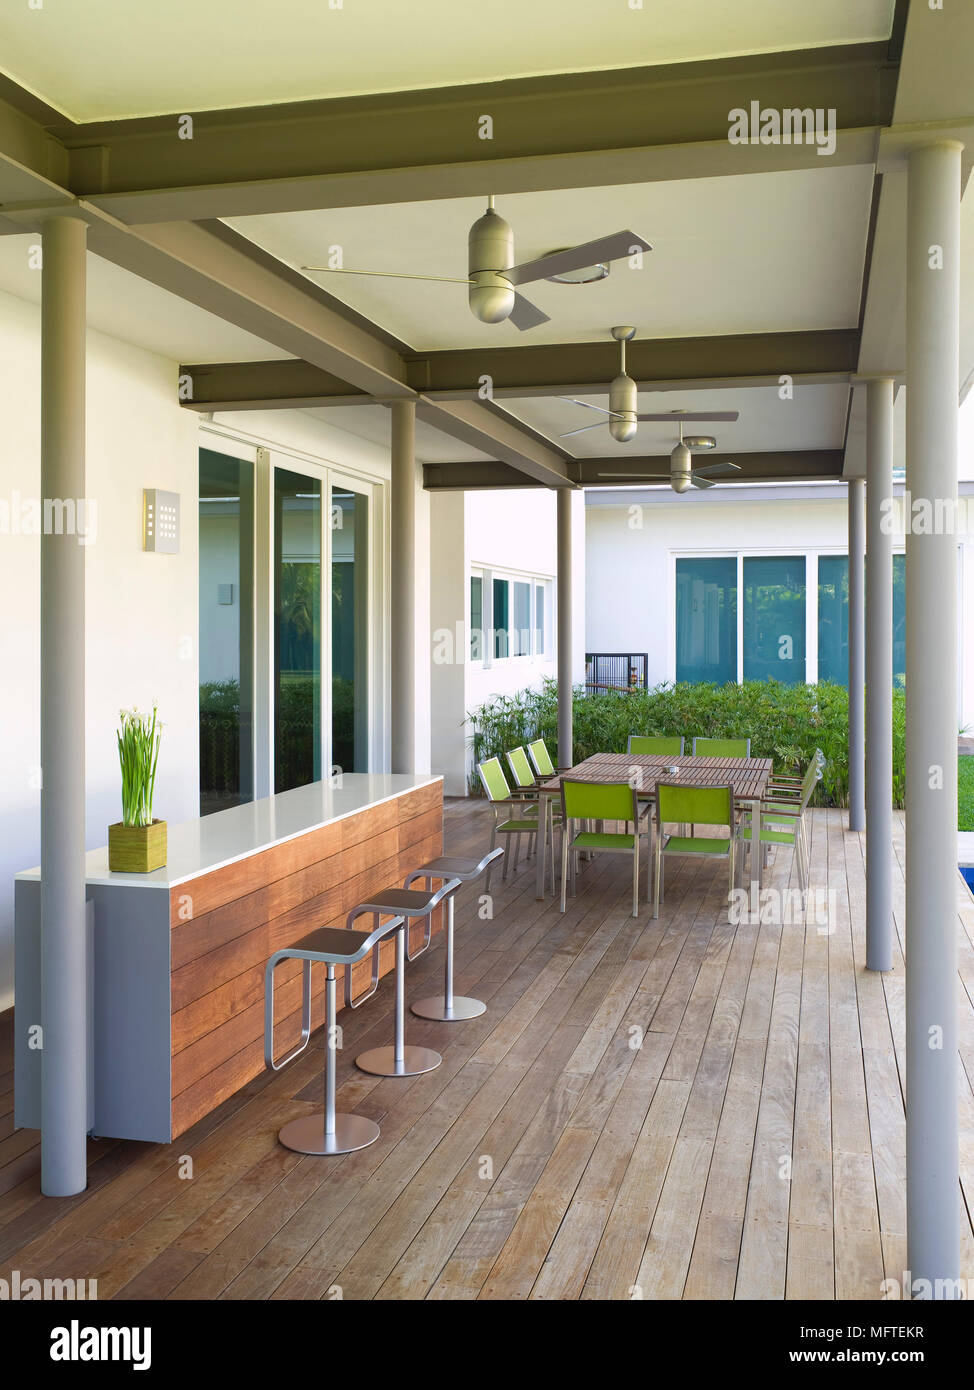 Bar stools at breakfast bar on outdoor decked terrace of modern house Stock Photo